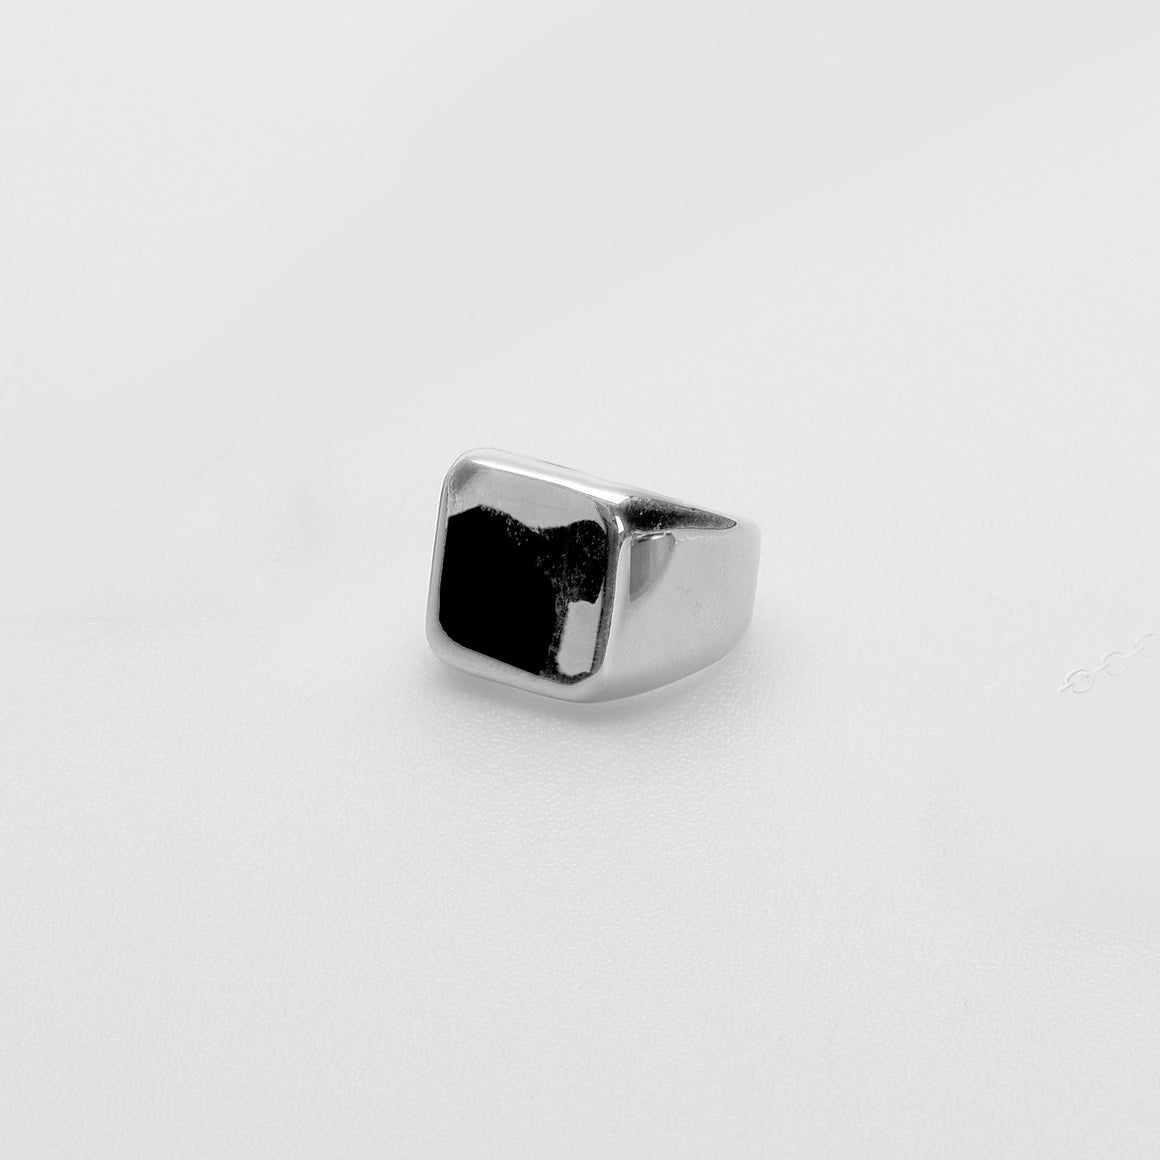 KEENA SQUARE SIGNET RING | SILVER Rings Urban Clothing from 54 Floral Clothing